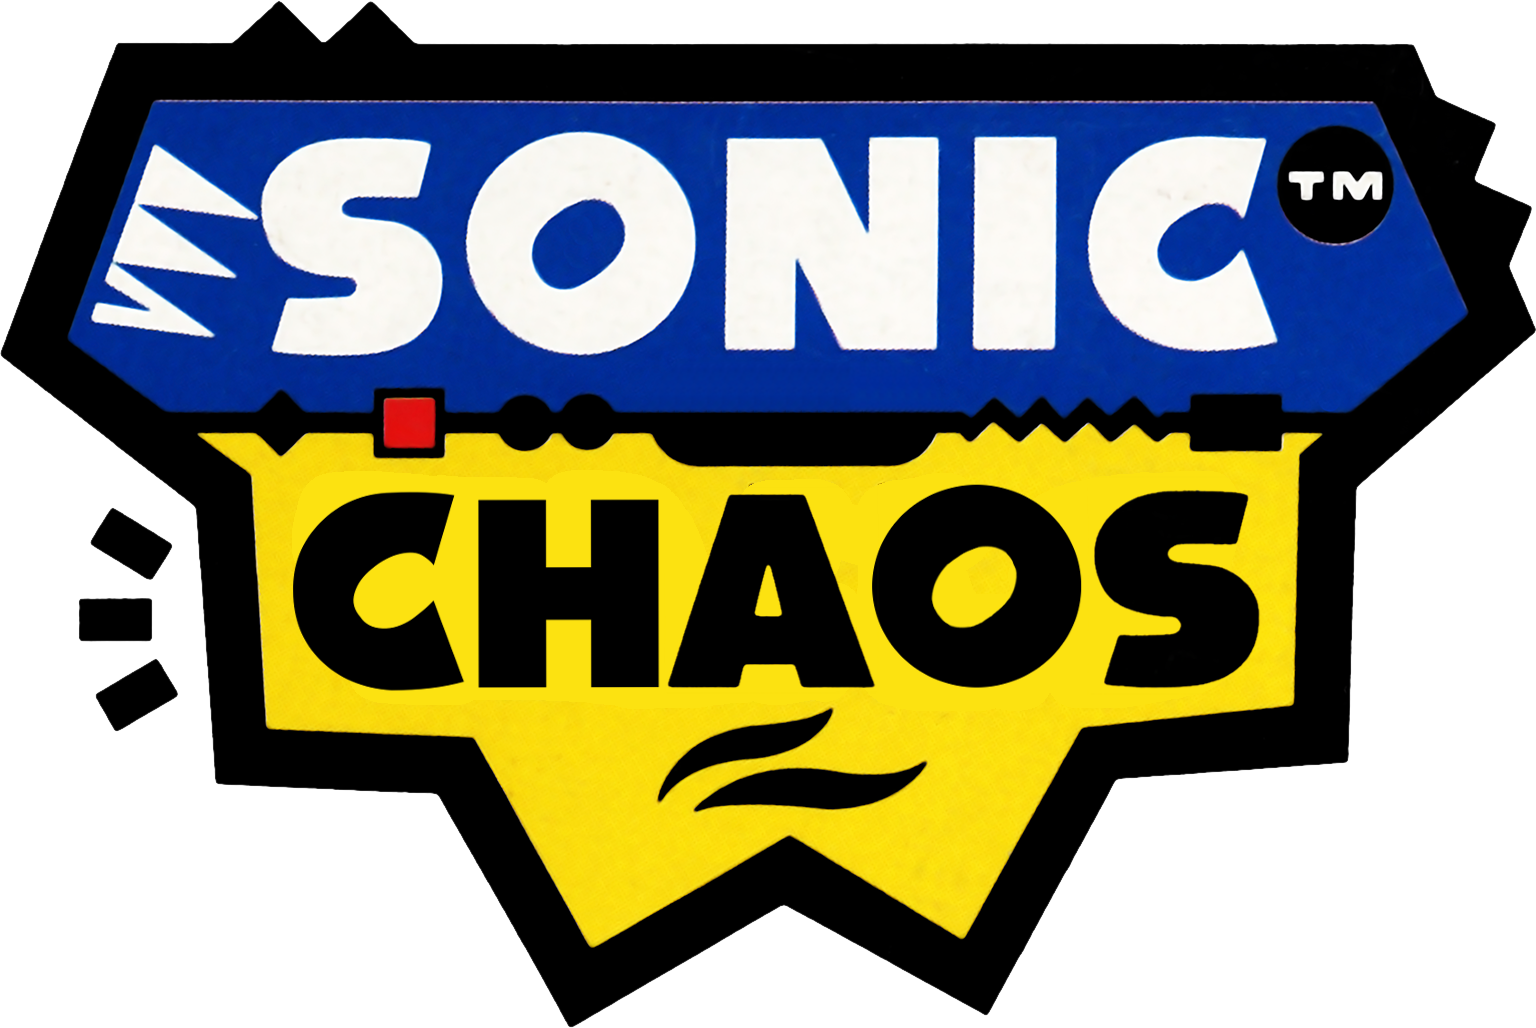 Grid for Sonic Chaos by Chickenzes